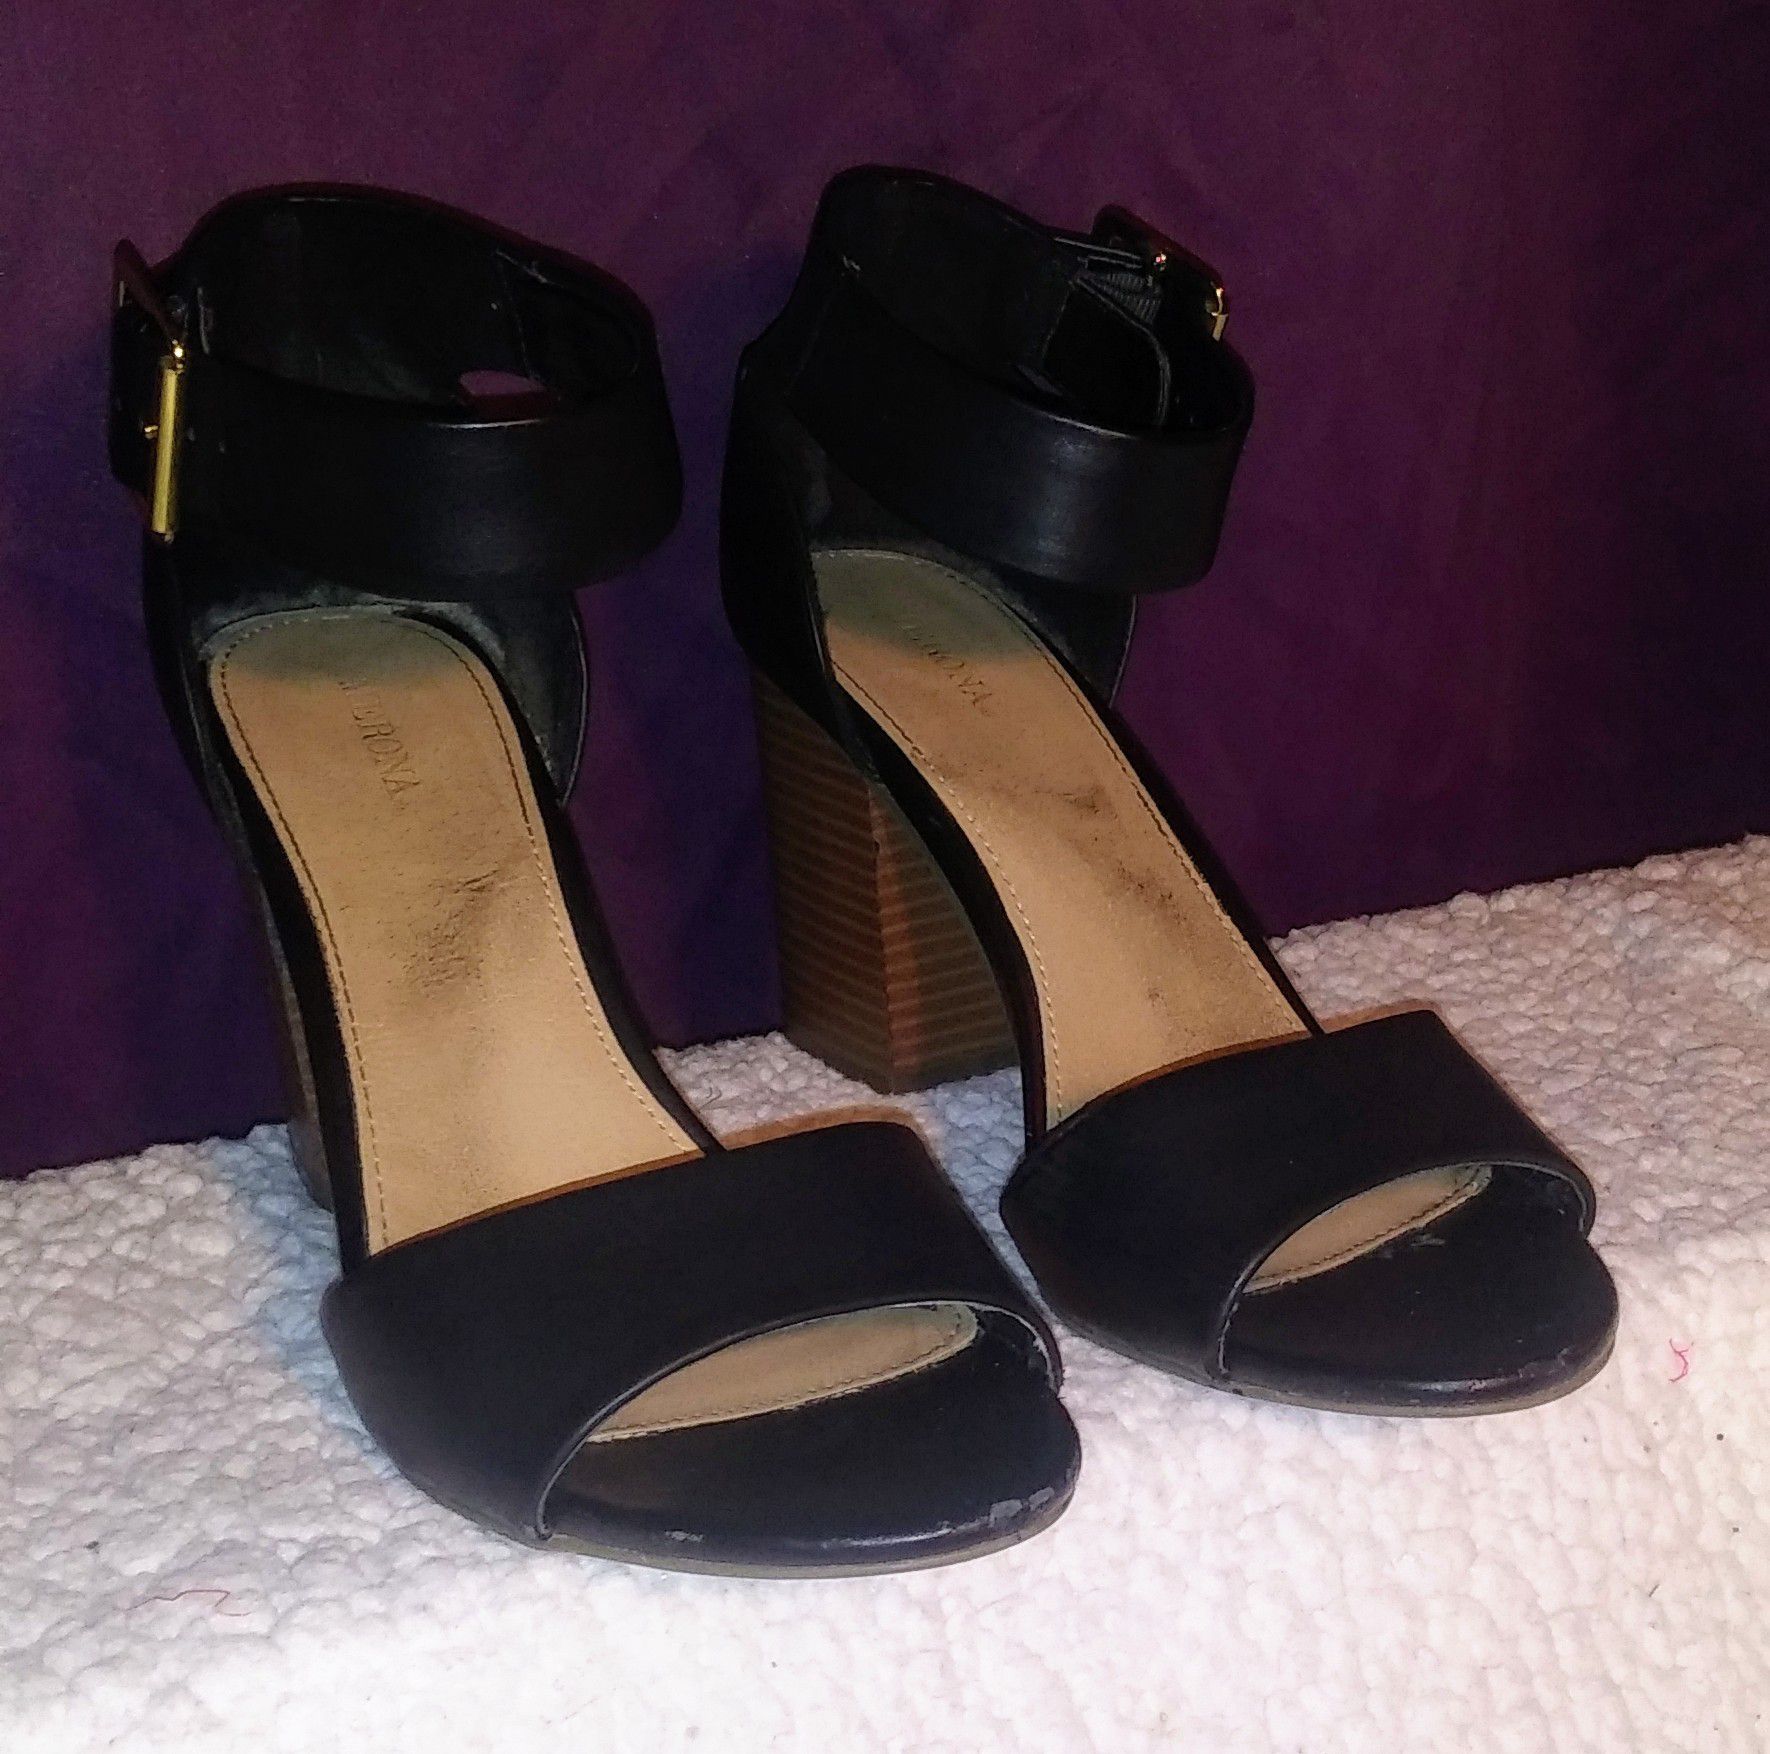 Women's Black Leather High Heel Shoes. 9 1/2